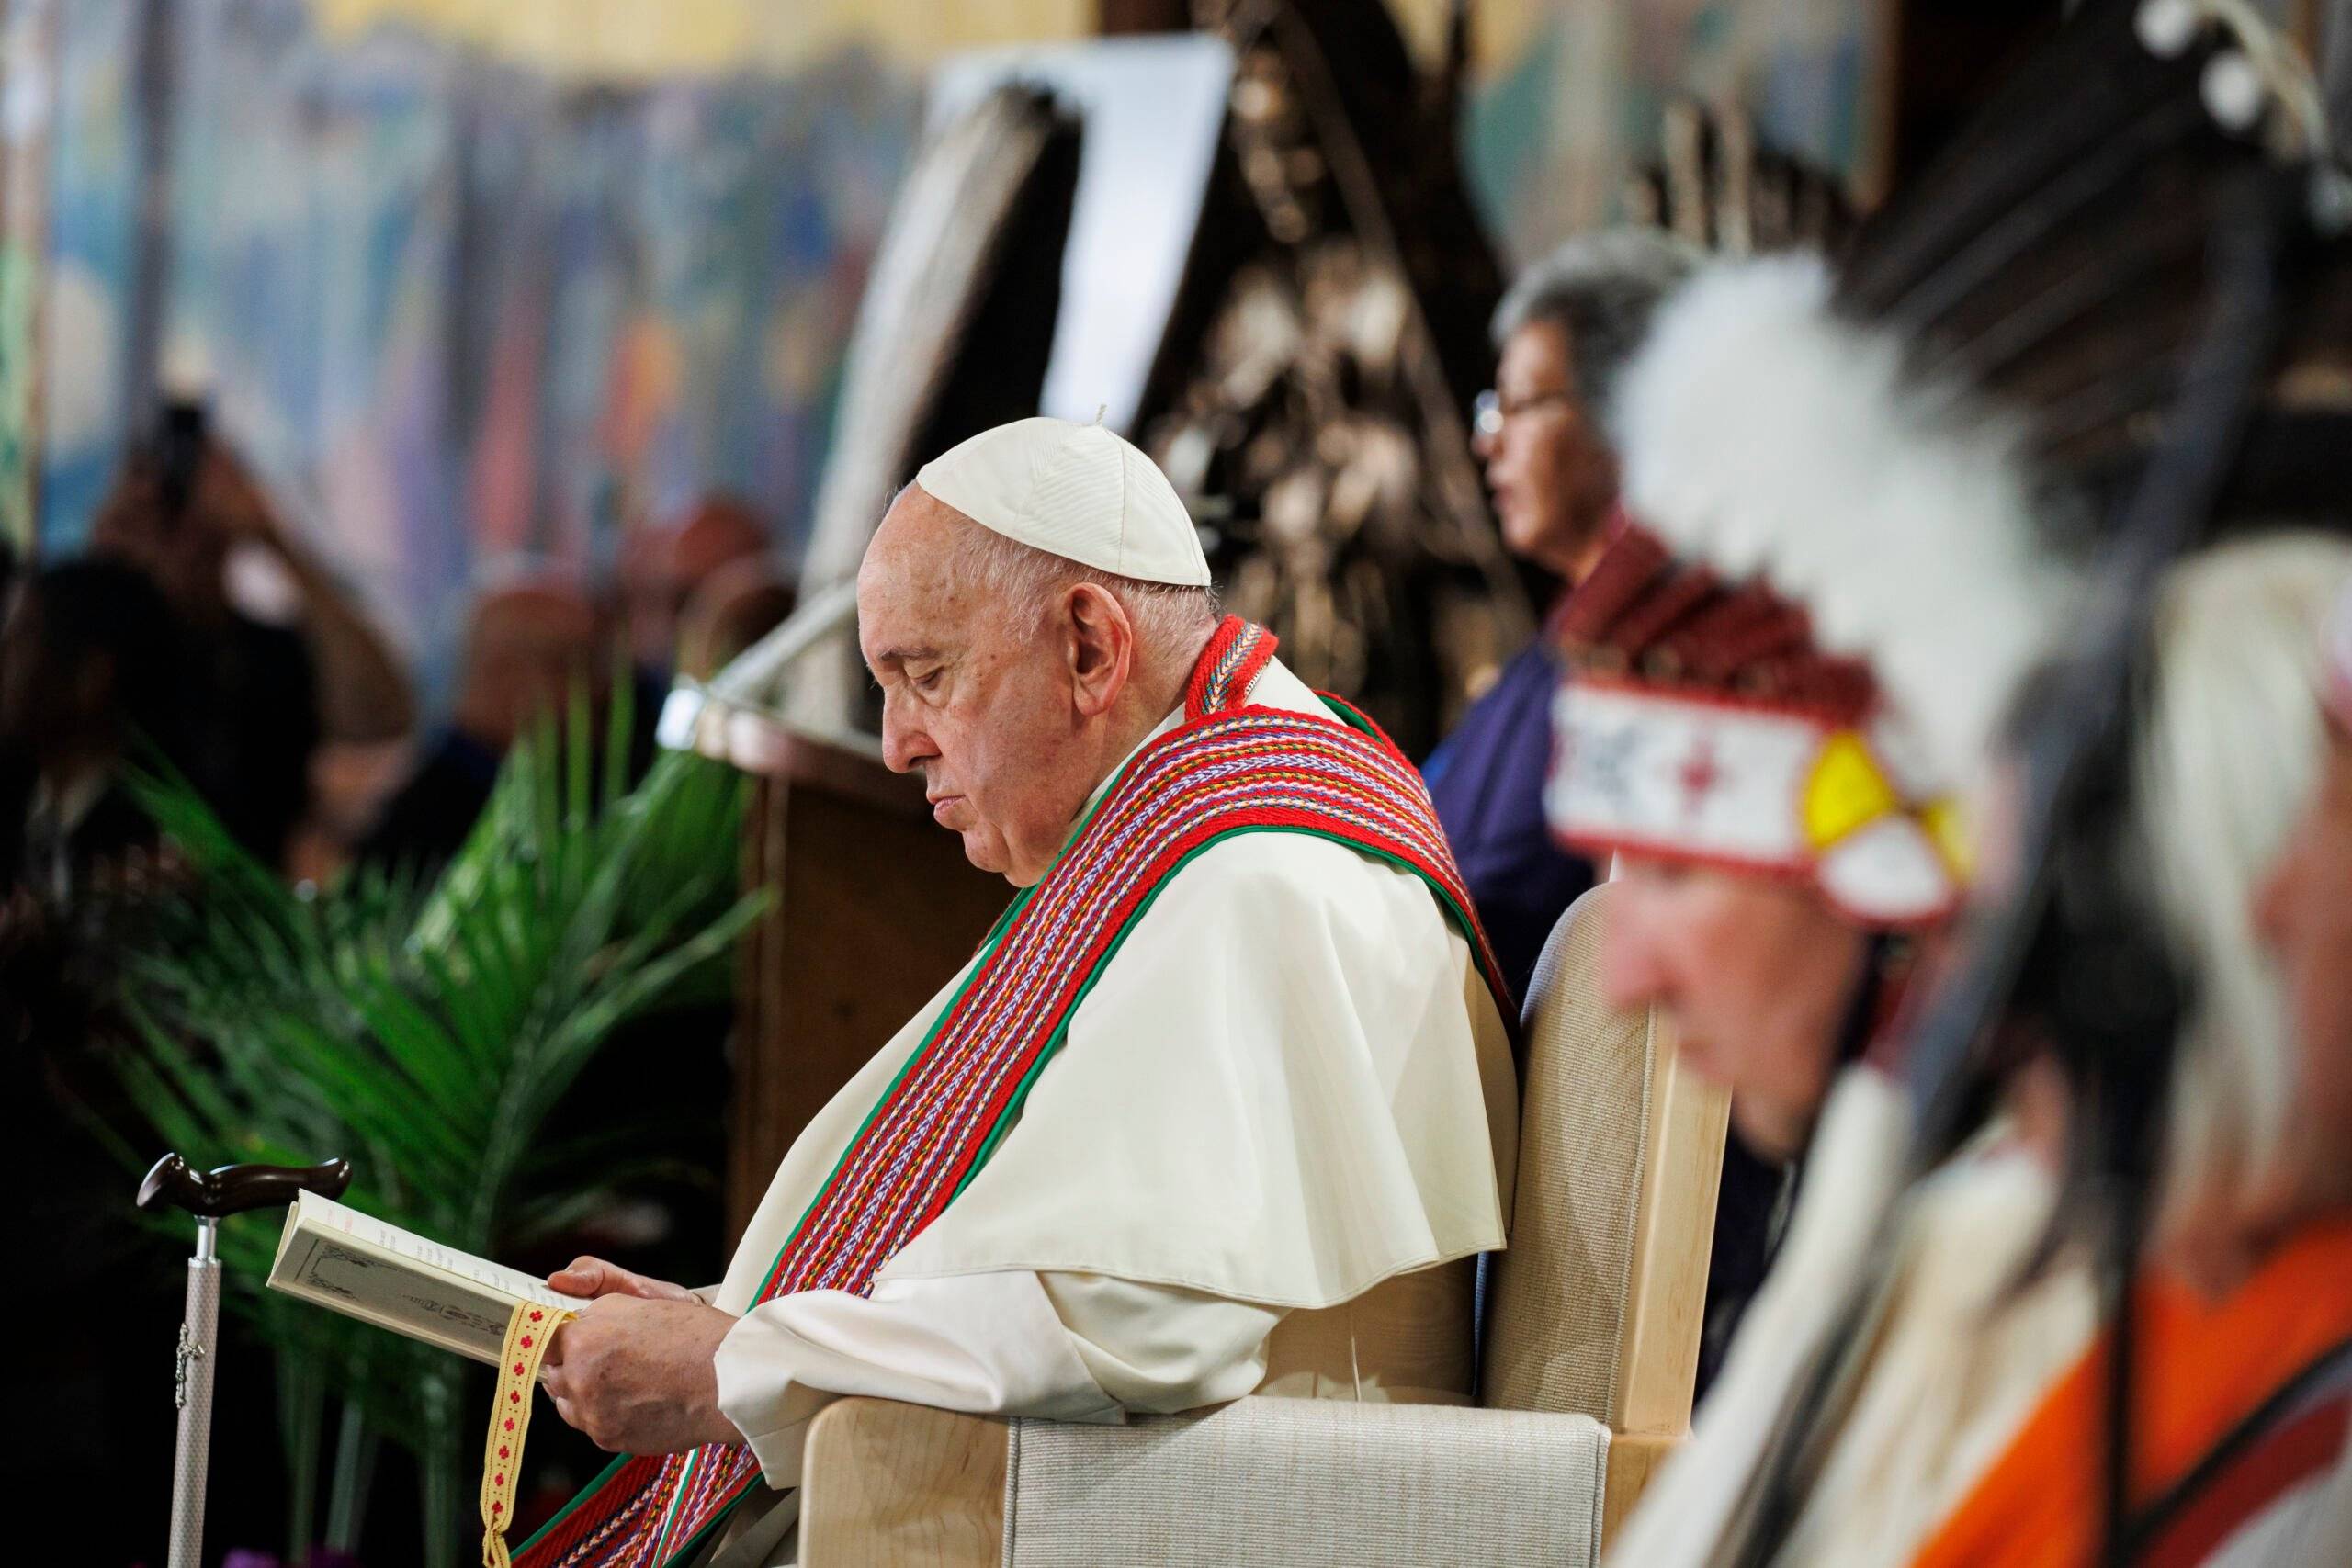 LAC STE. ANNE, AB - JULY 26: Pope Francis reads along at the Ste. Anne Shrine after making the pilgrimage to the lake on July 26, 2022 in Lac Ste. Anne, Canada. The pope is meeting with Indigenous communities and community leaders in Canada in an effort to reconcile the history of physical and sexual abuse of Indigenous children in the country's Catholic-run residential schools, as detailed in a 2015 Canadian-government-funded commission report.   Cole Burston/Getty Images/AFP (Photo by Cole Burston / GETTY IMAGES NORTH AMERICA / Getty Images via AFP)